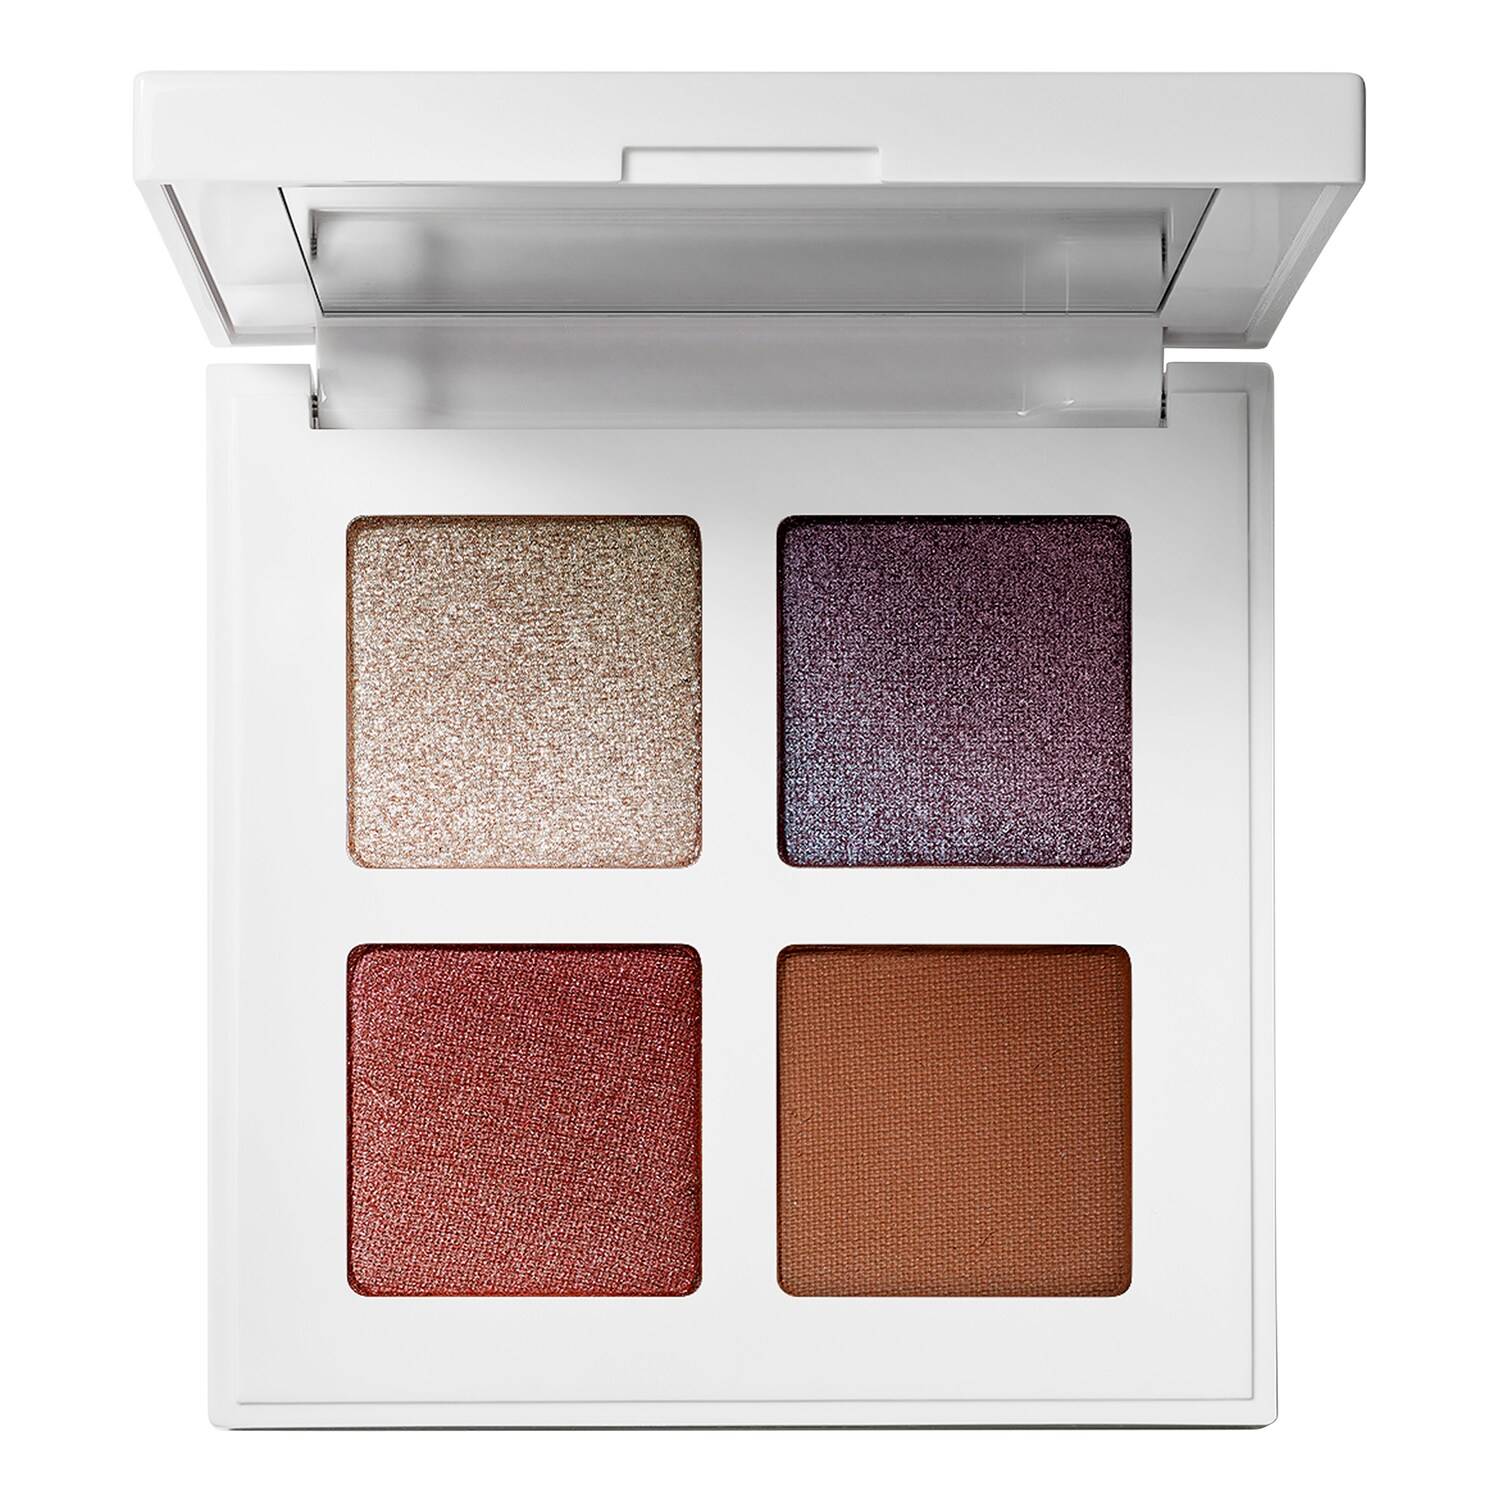 Makeup By Mario Glam Quad Eyeshadow Palette 4.8G Rosy